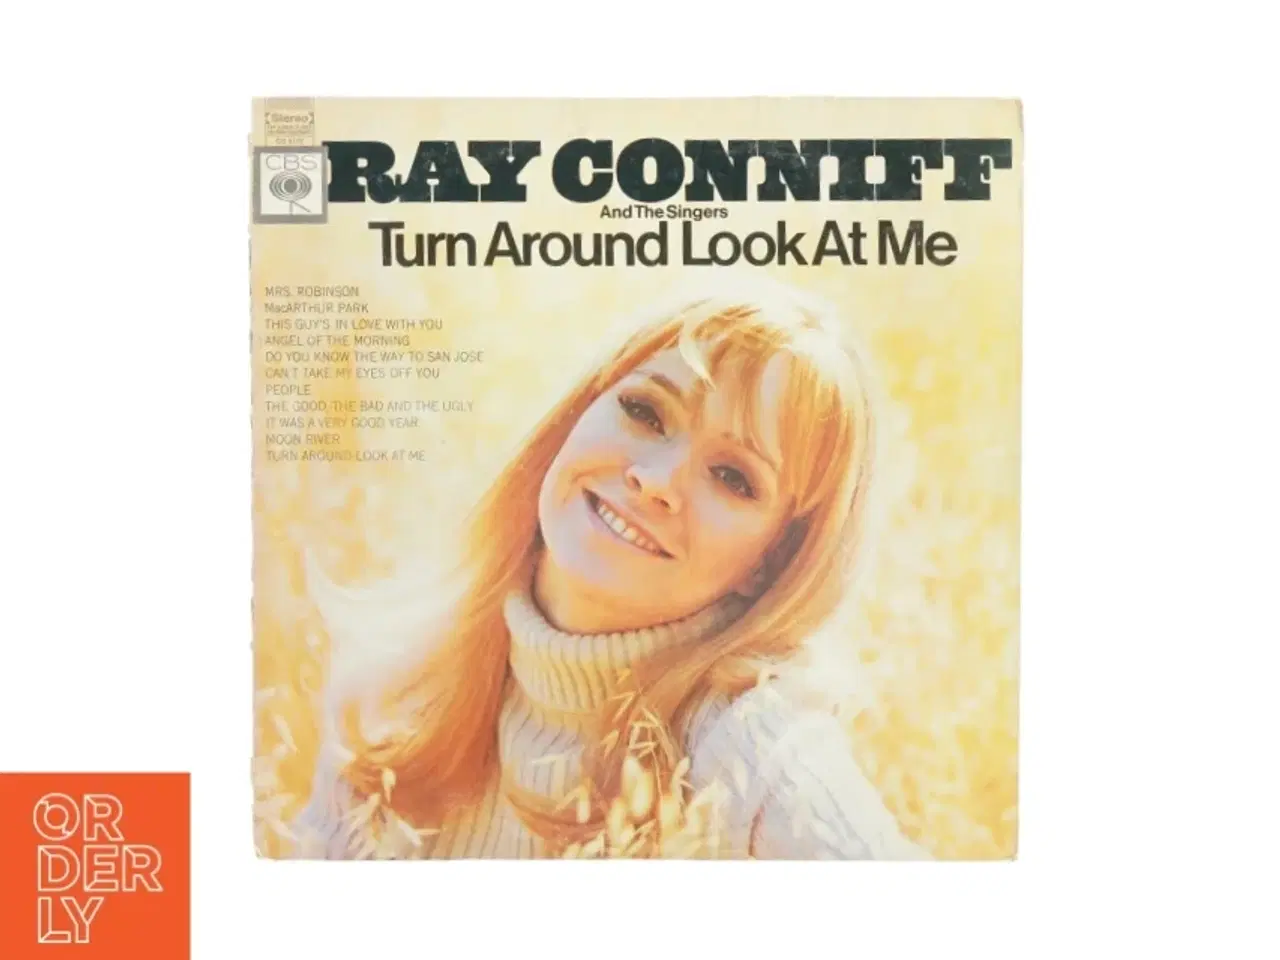 Billede 1 - Ray Conniff and the singers Turn Around Look At Me Vinylplade